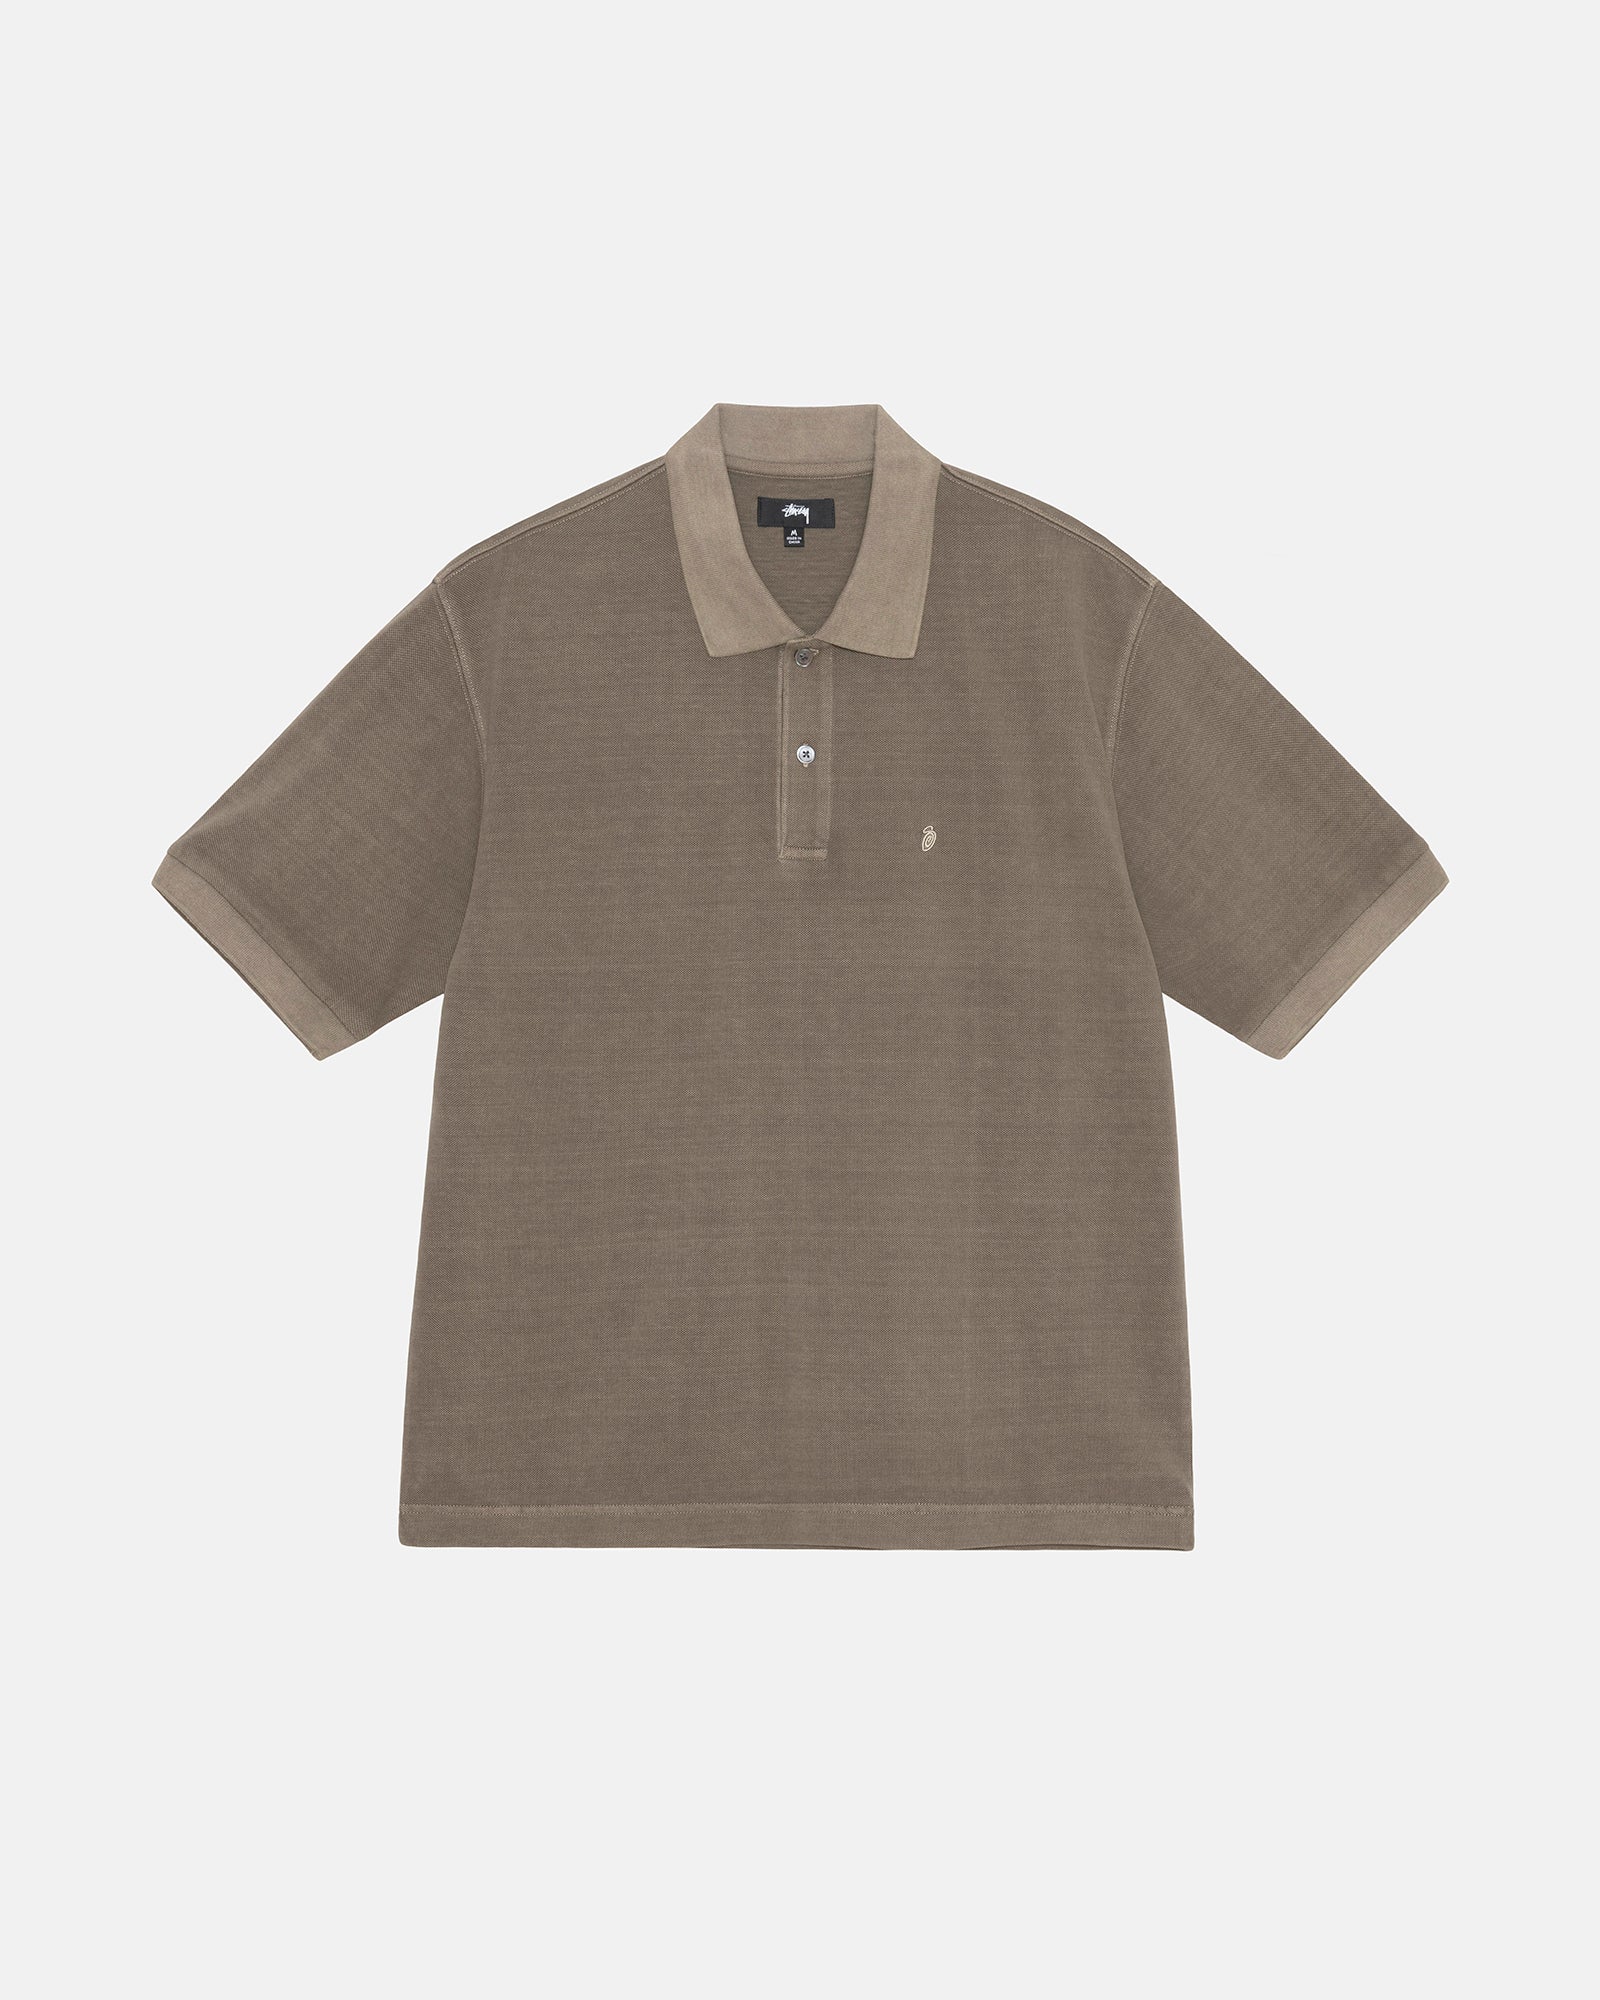 PIGMENT DYED PIQUE POLO